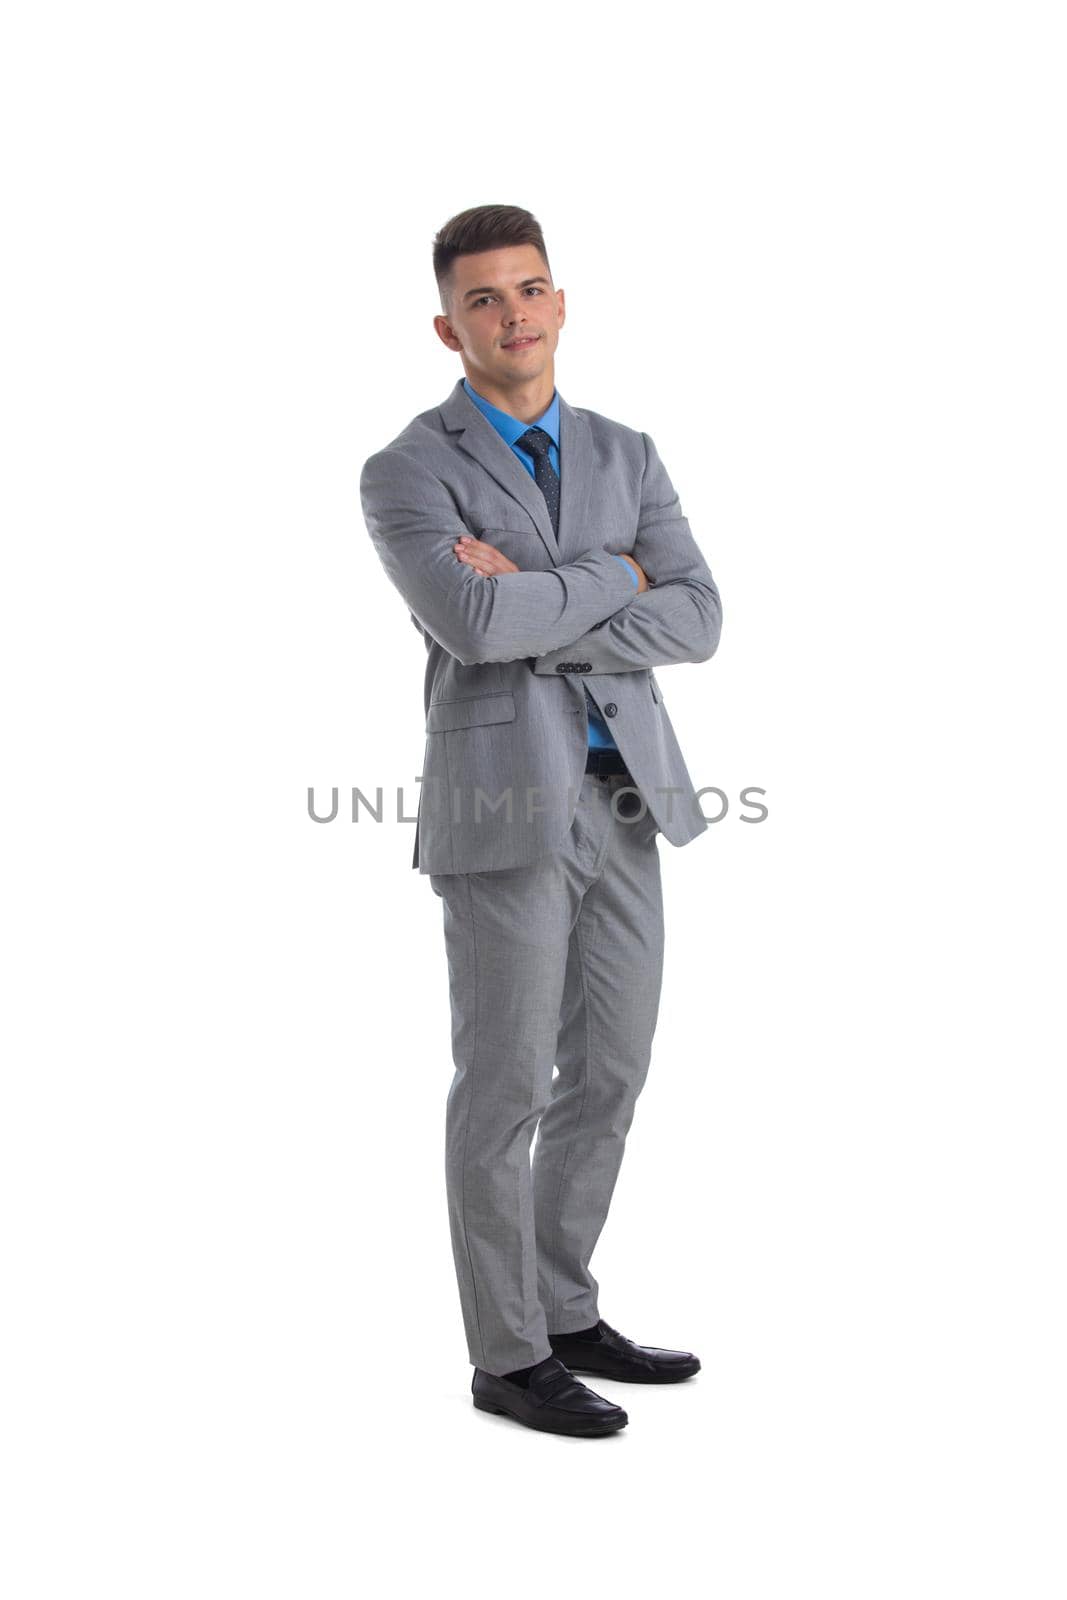 Business man with crossed arms by ALotOfPeople